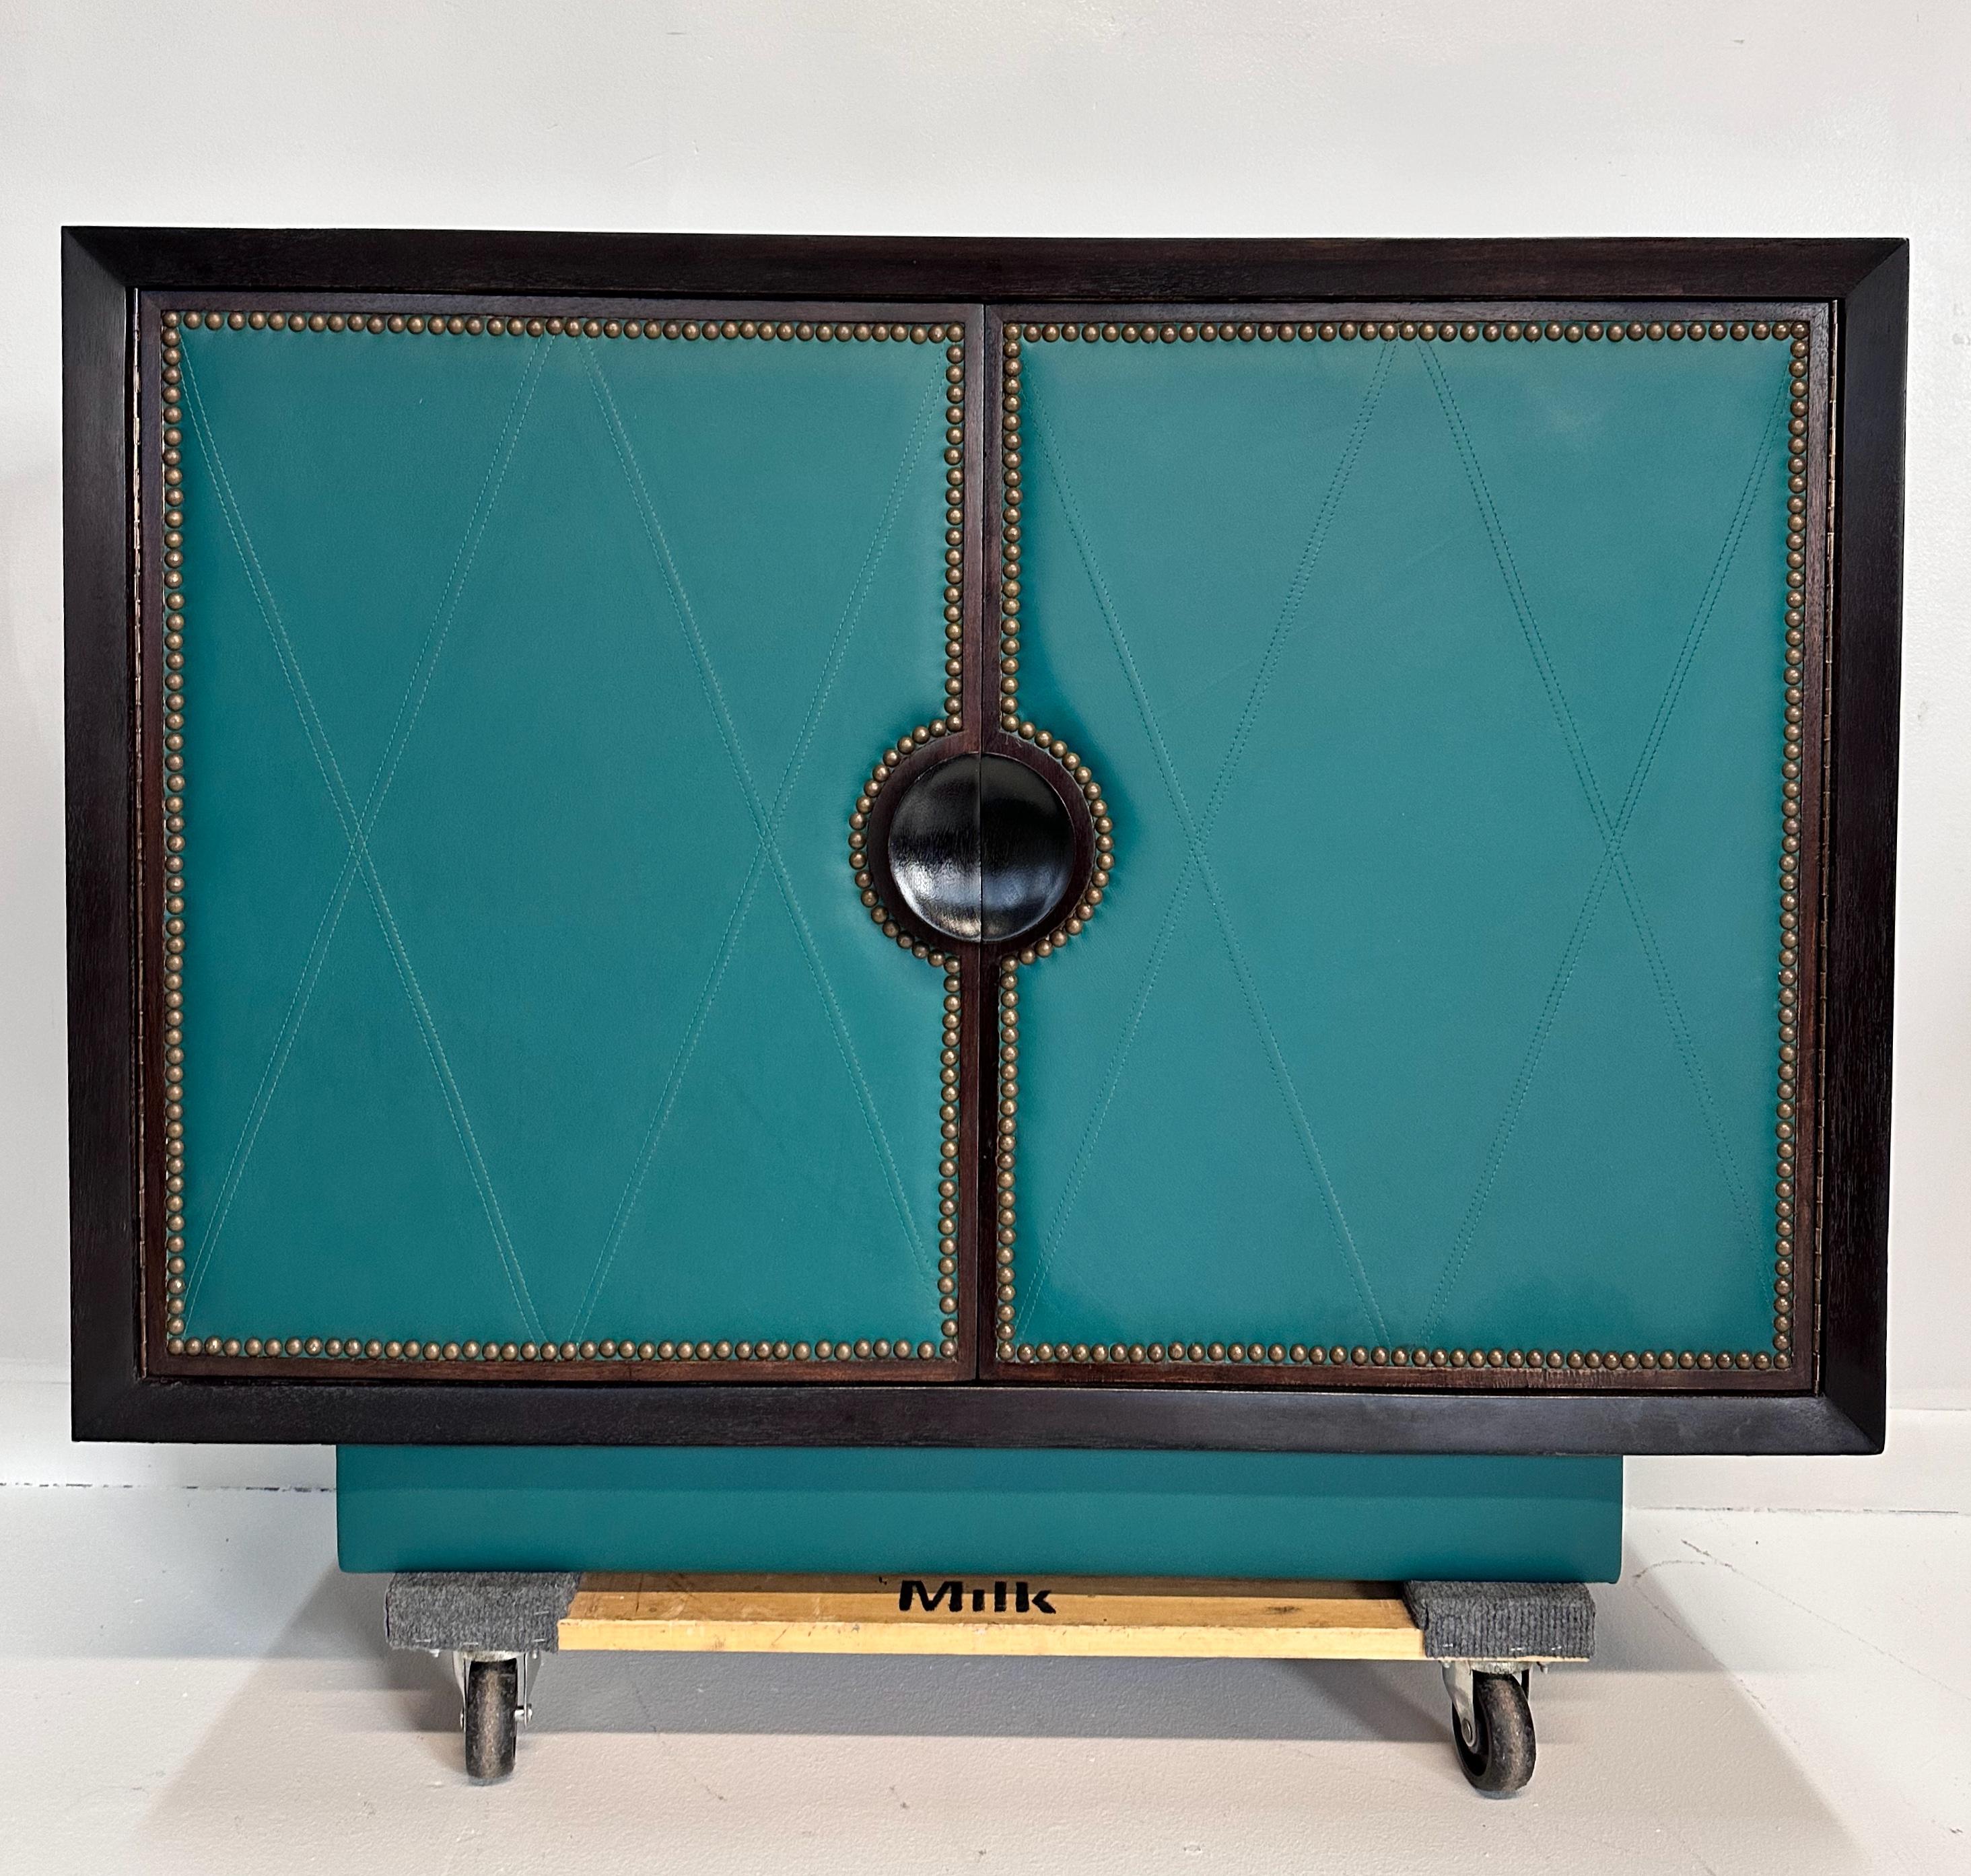 Classic art deco high style mahogany cabinet with tooled and sewn diamond pattern green leather door panels and distinctive polished brass tacks. Features three large spacious drawers and two small top drawers.

Beautifully restored.